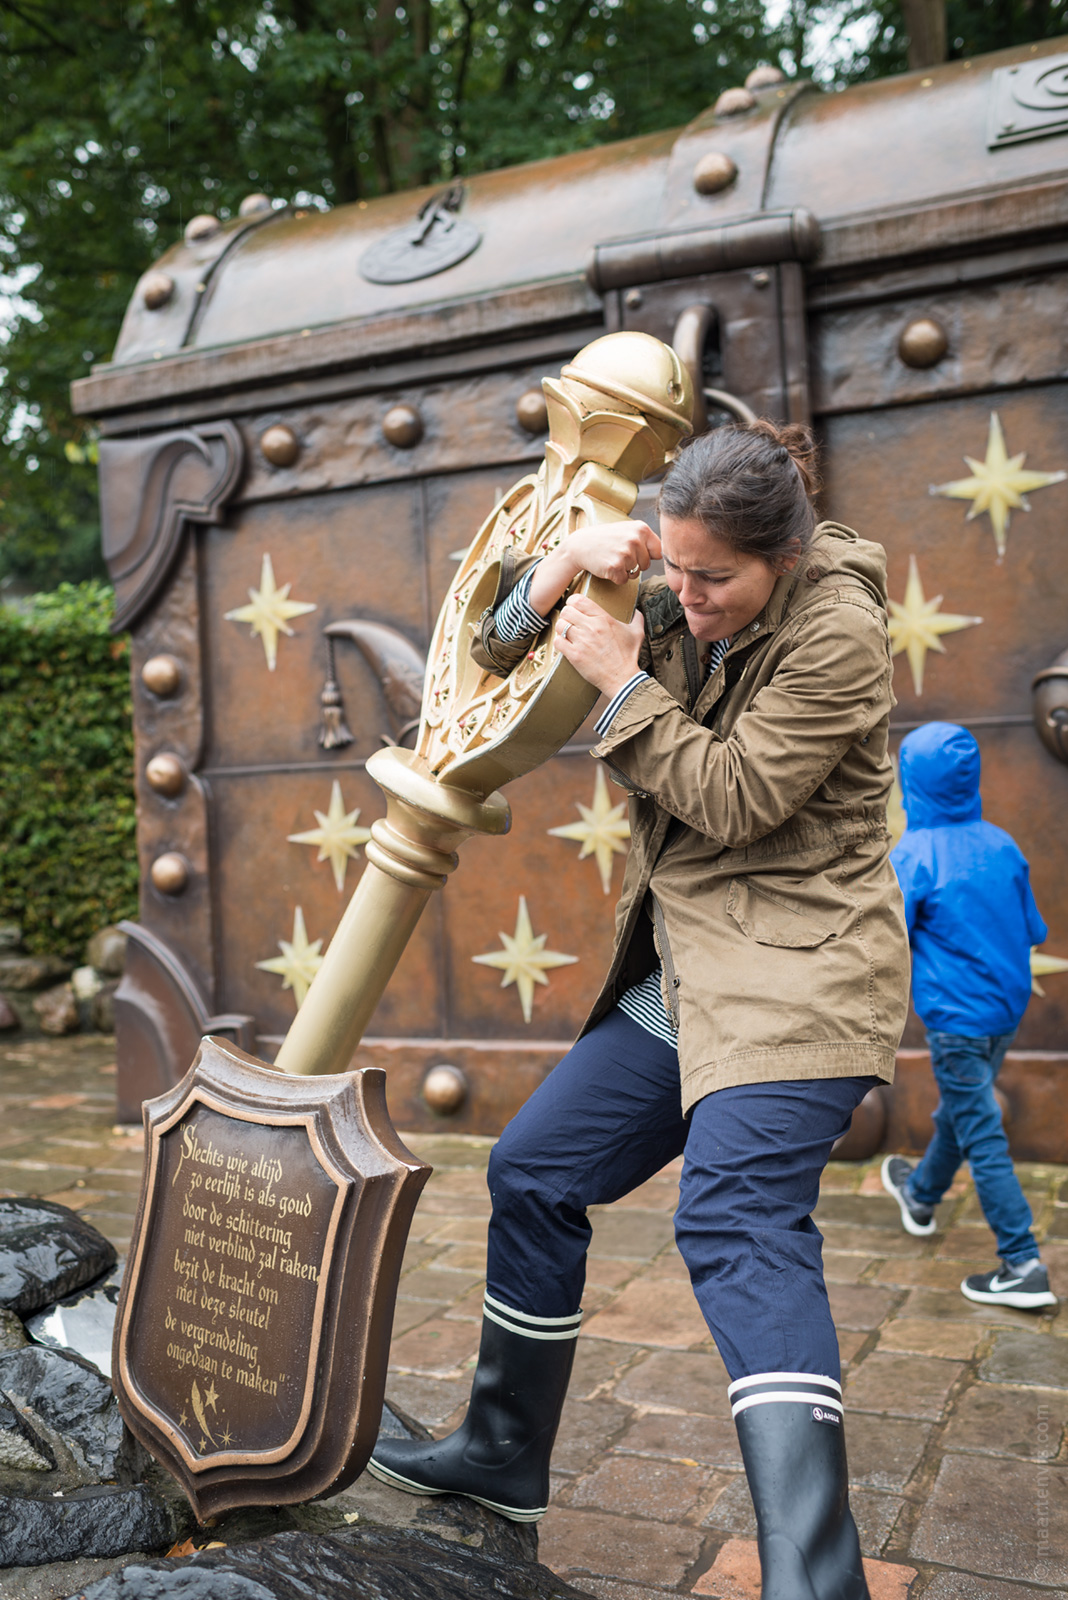 The Efteling theme park - Fish and Feathers Travel Blog